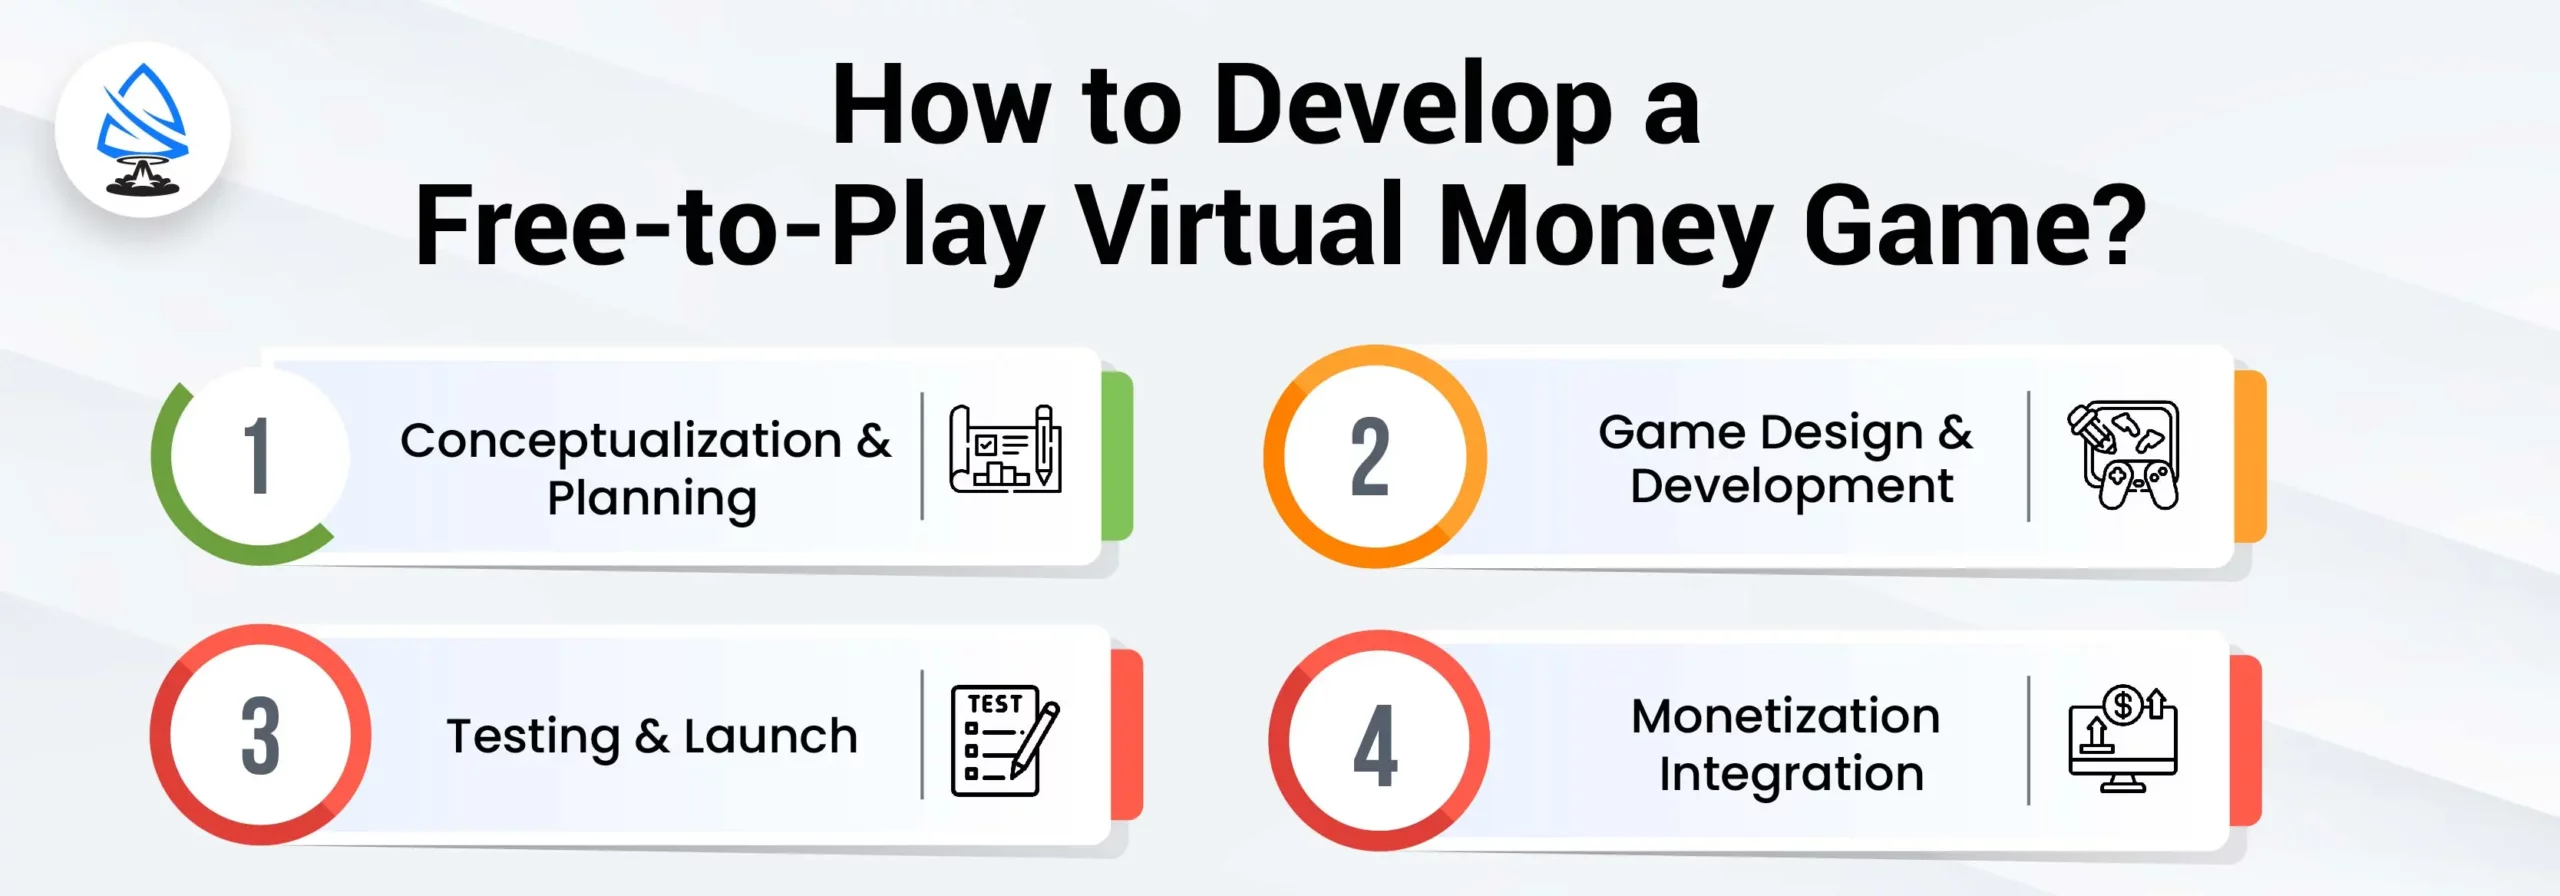 How to Develop a Free-to-Play Virtual Money Game?